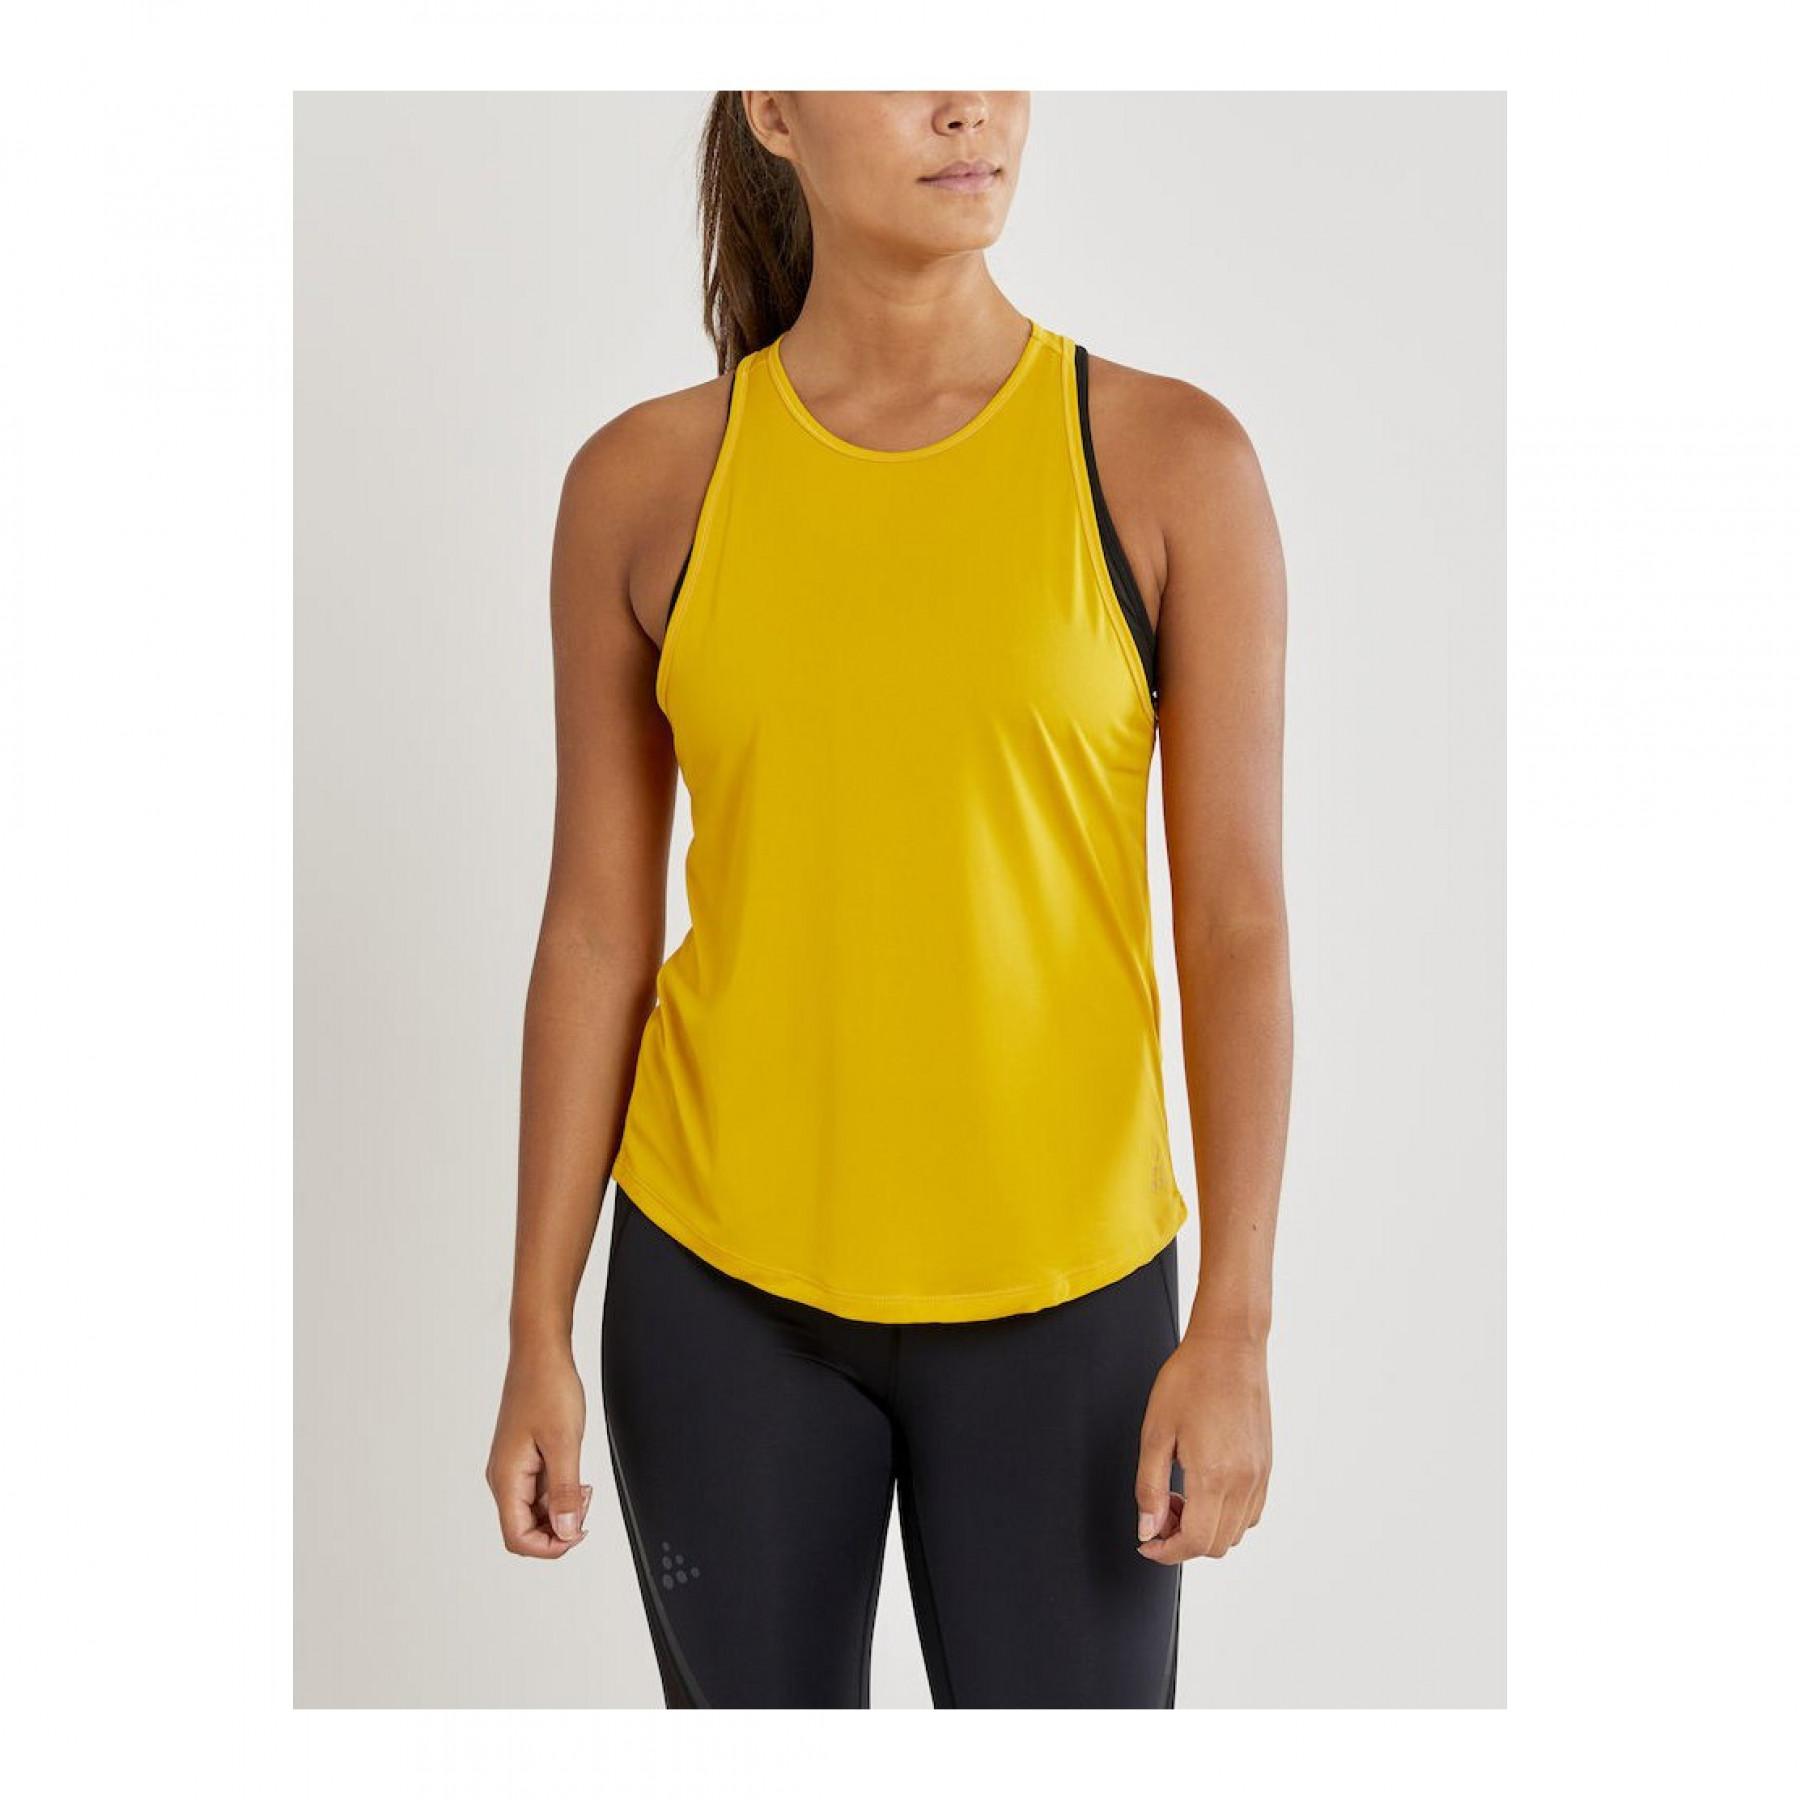 Women's tank top Craft Charge Fitness